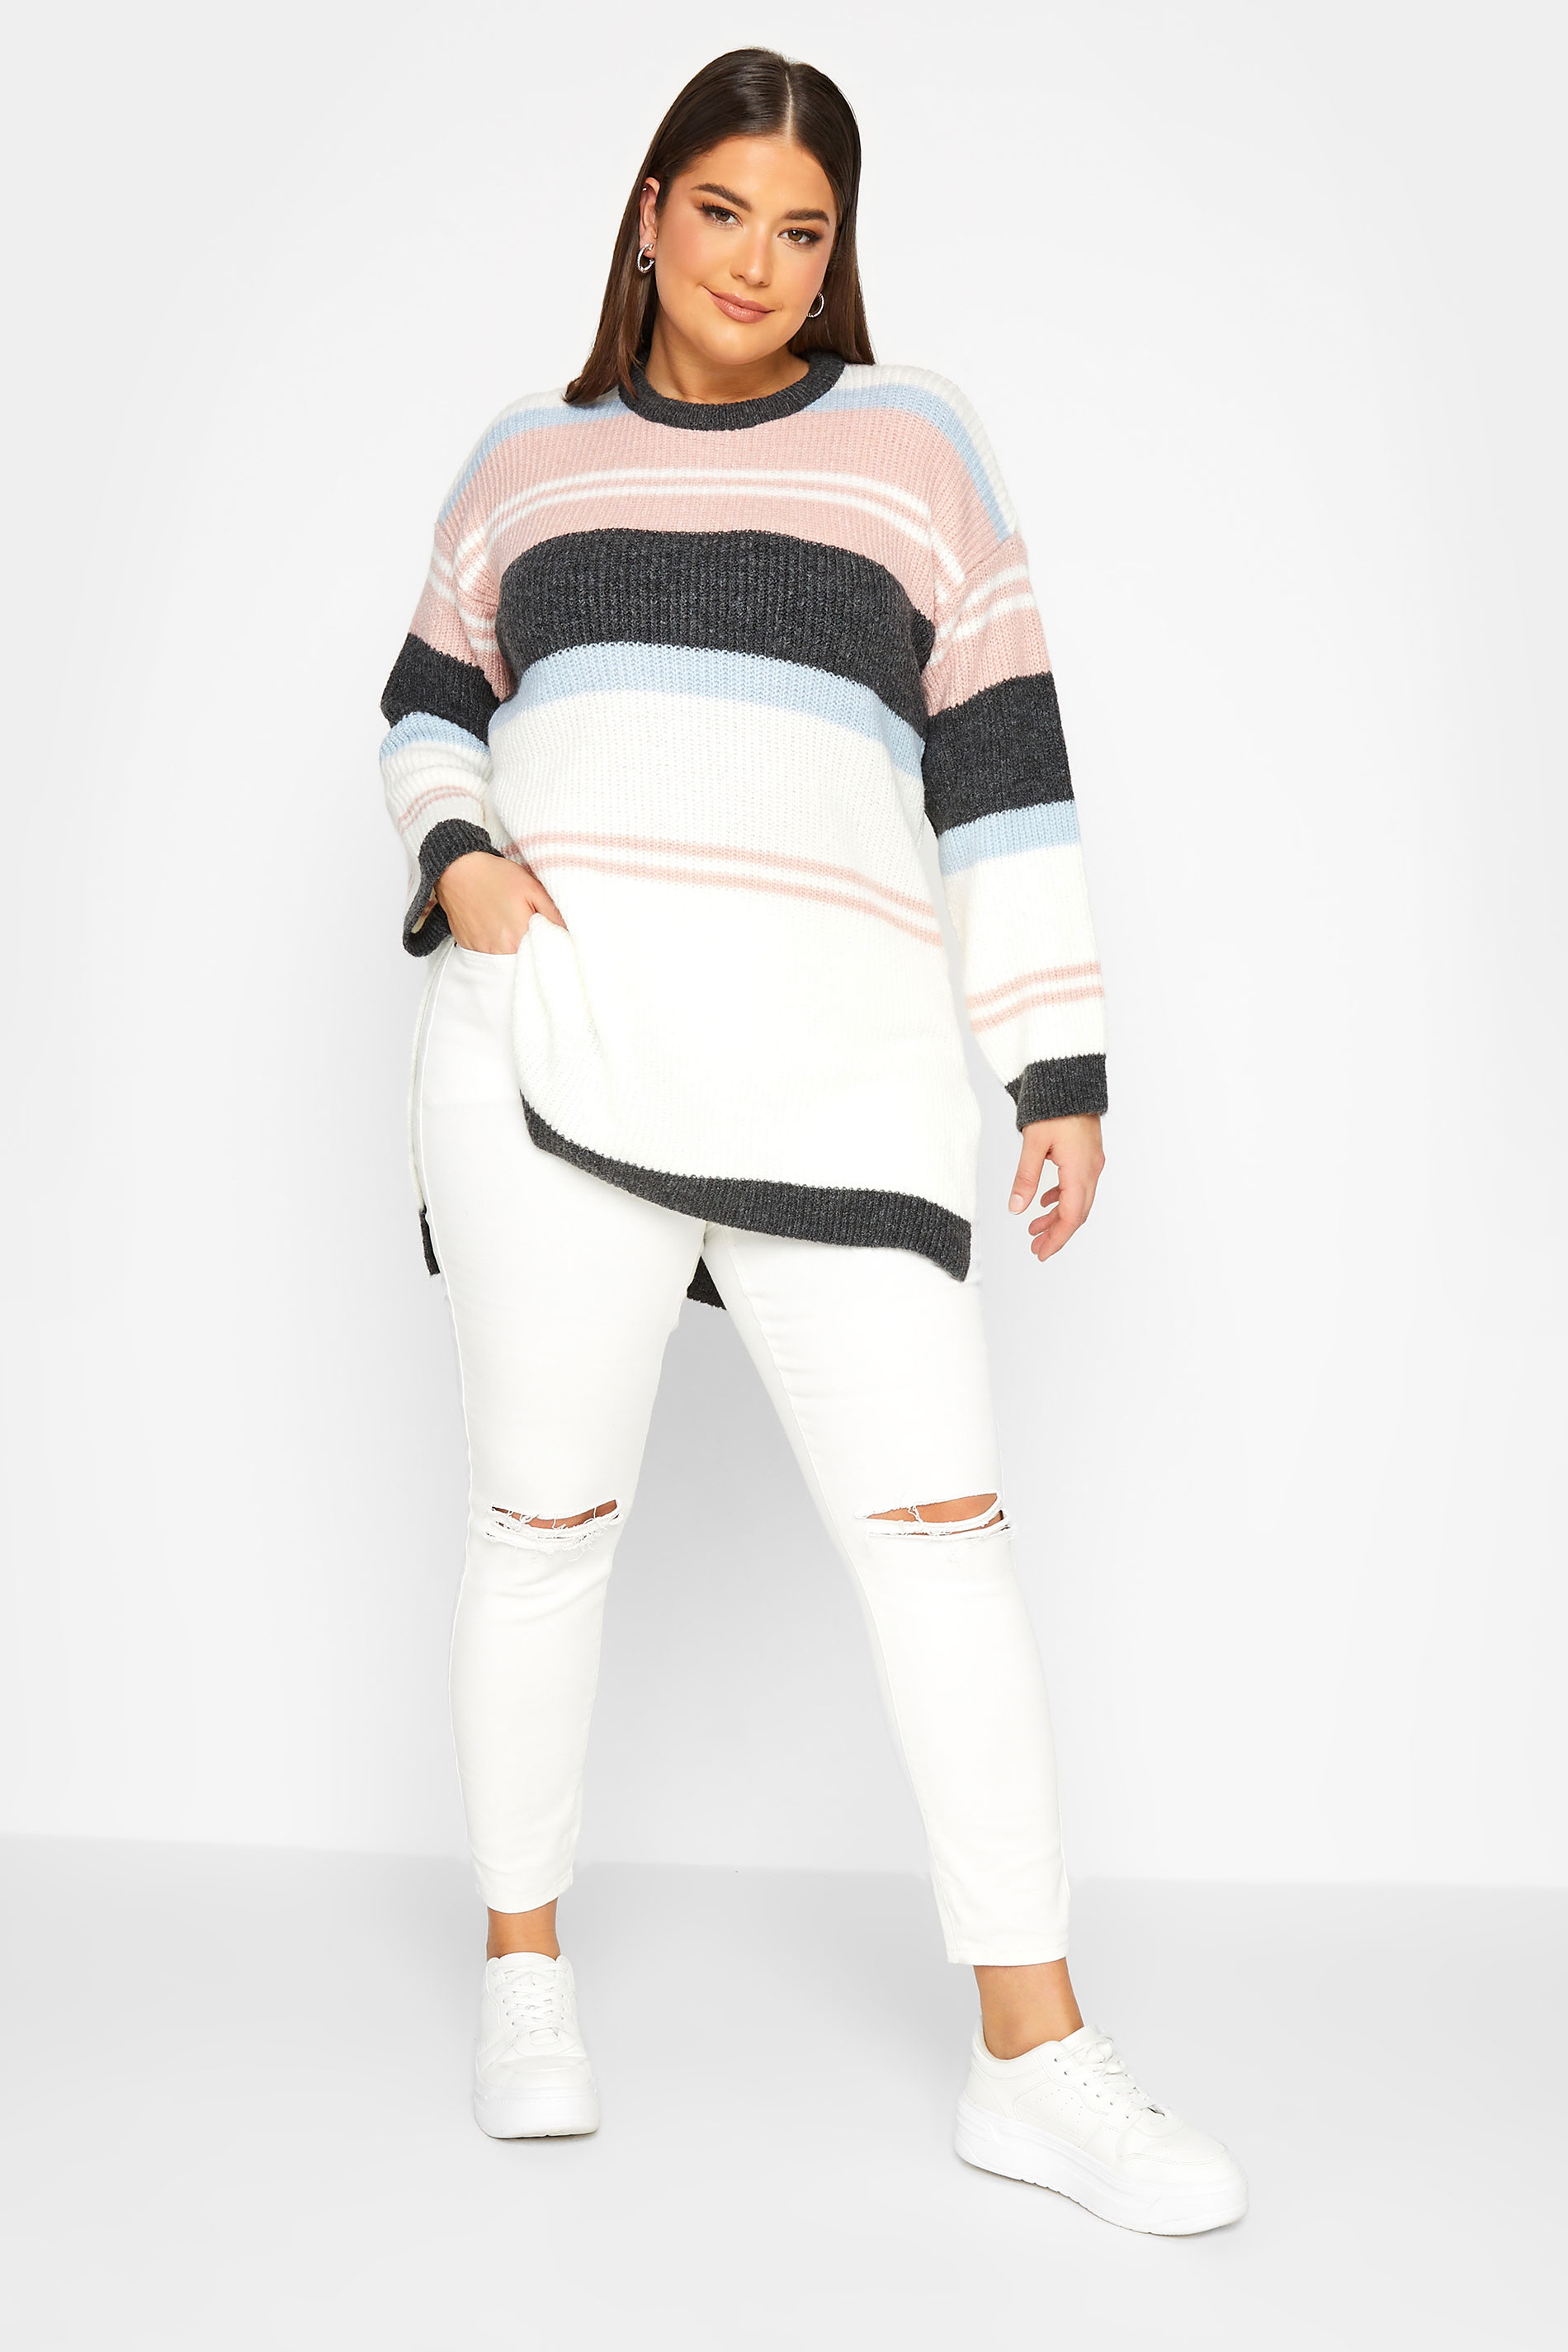 YOURS LUXURY Plus Size White & Pink Stripe Longline Jumper | Yours Clothing 2